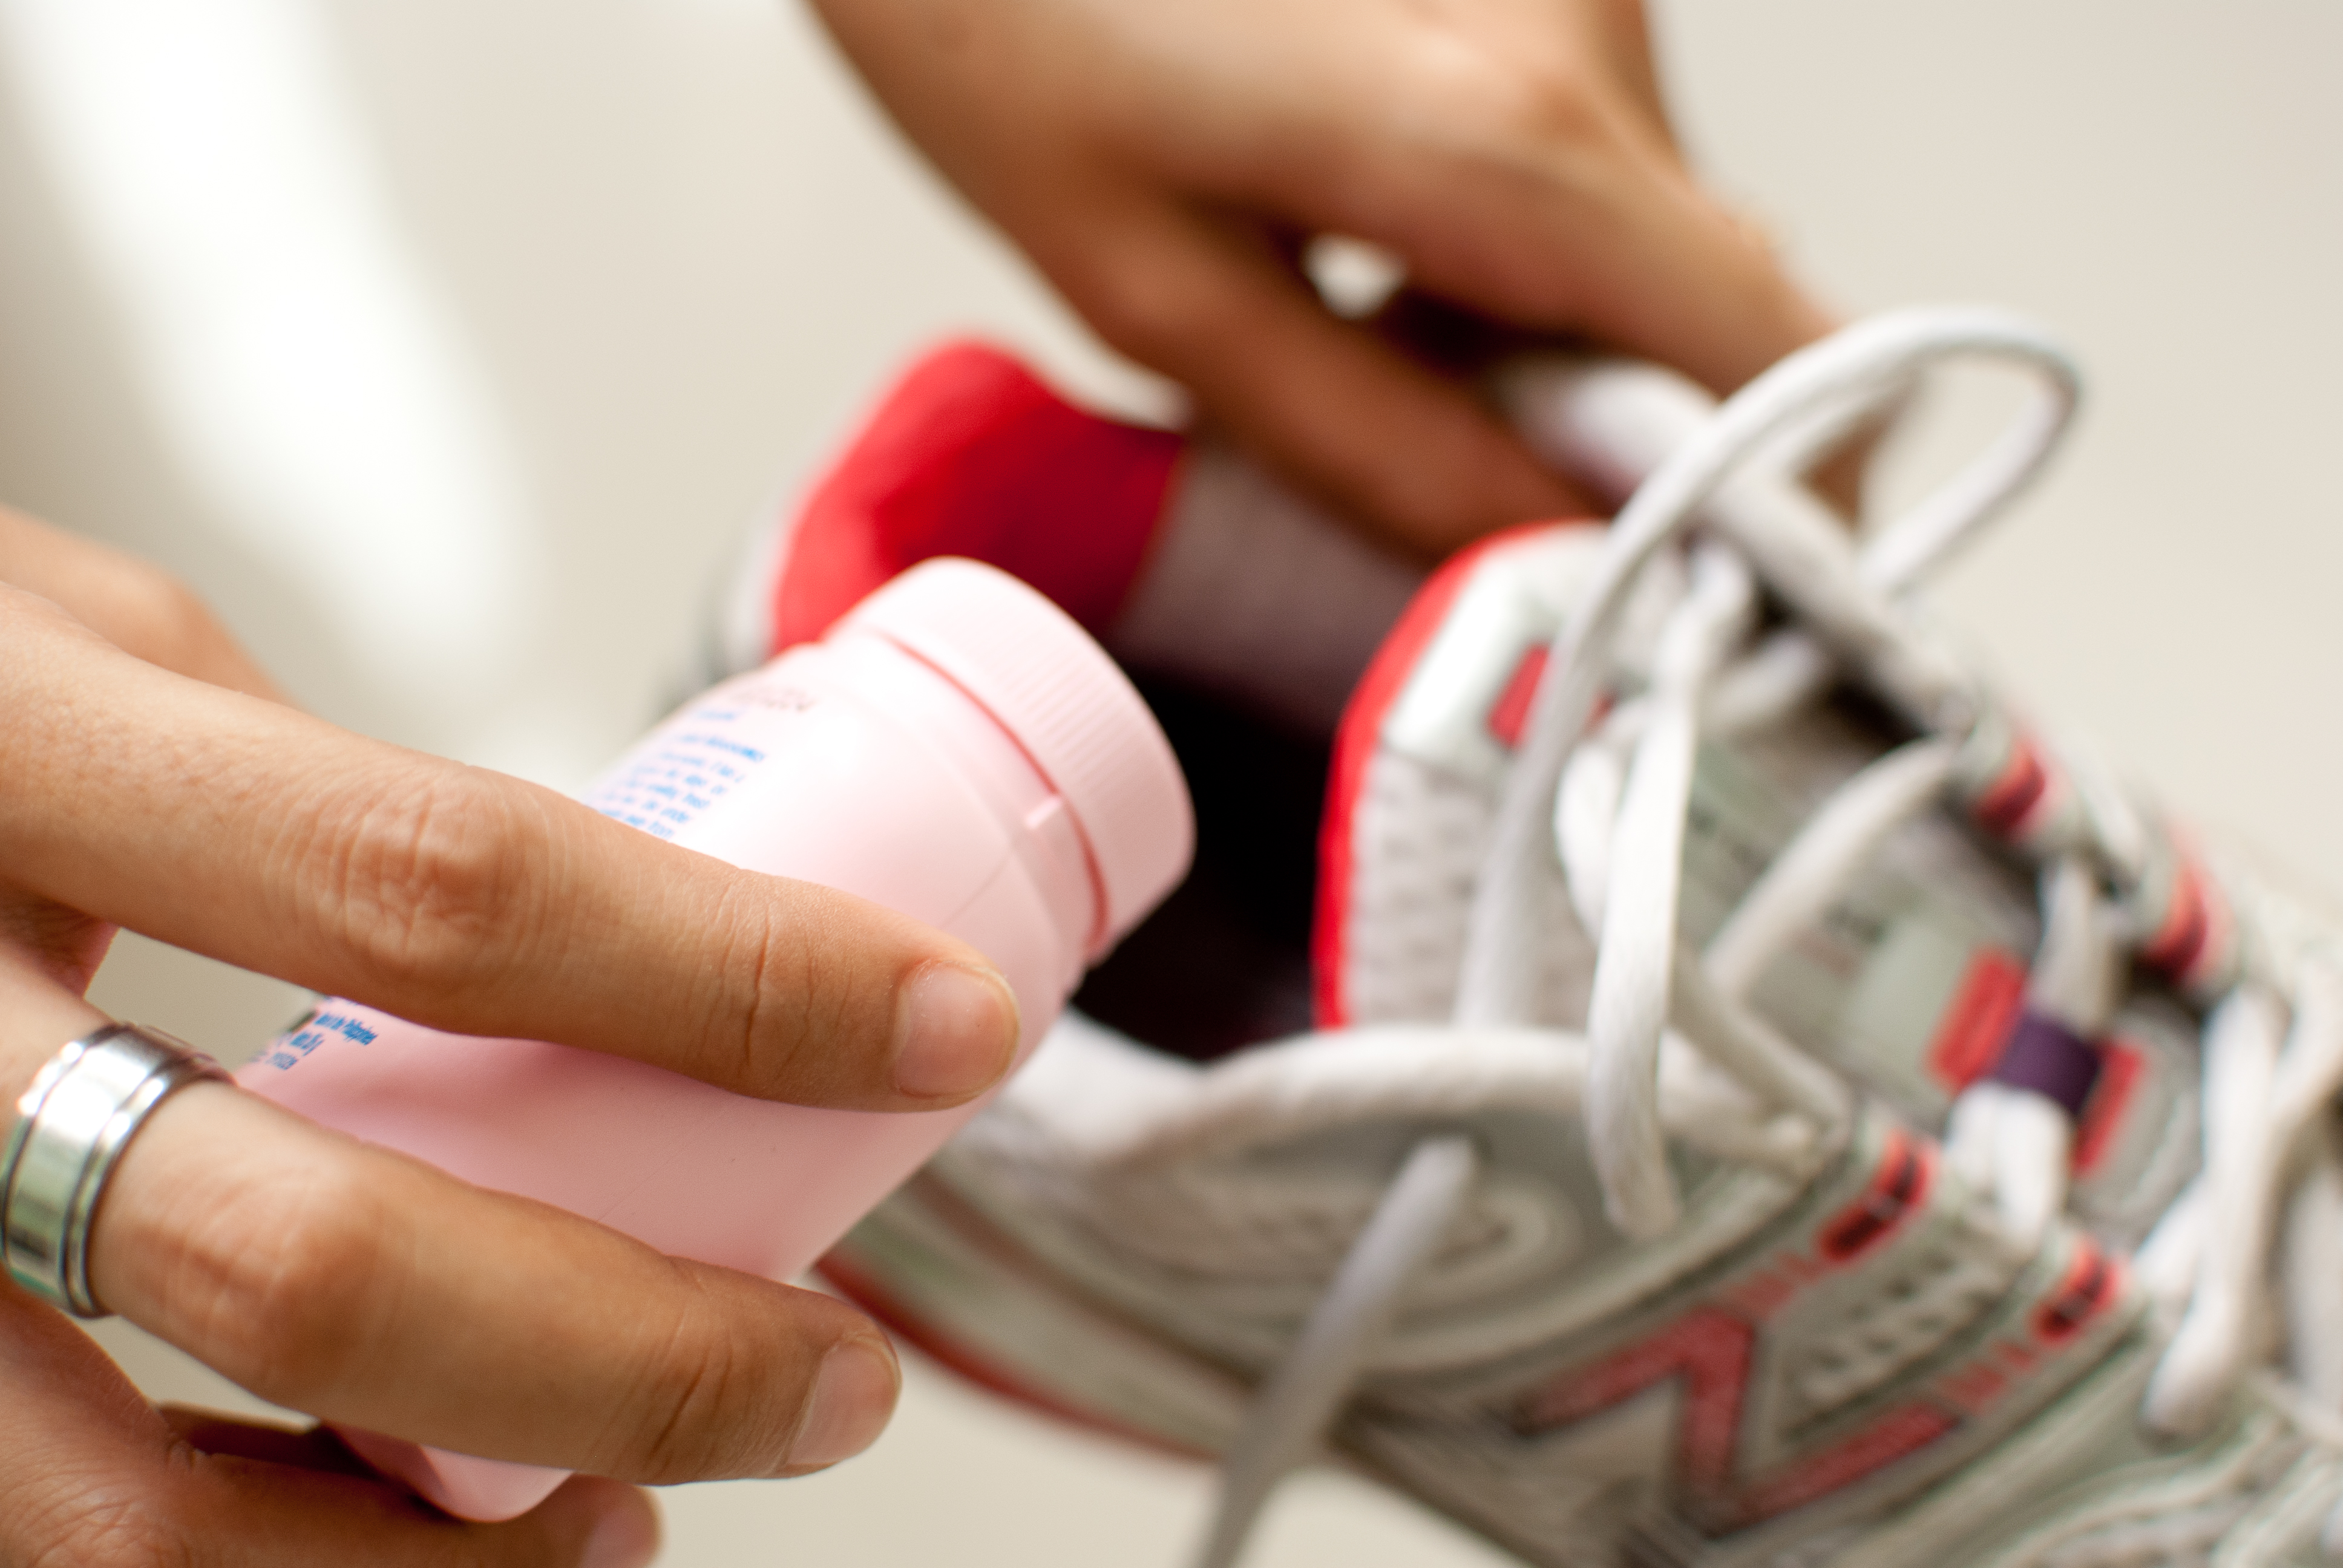 13 ways to reduce the embarrassing odor from your shoes - VetBest Health